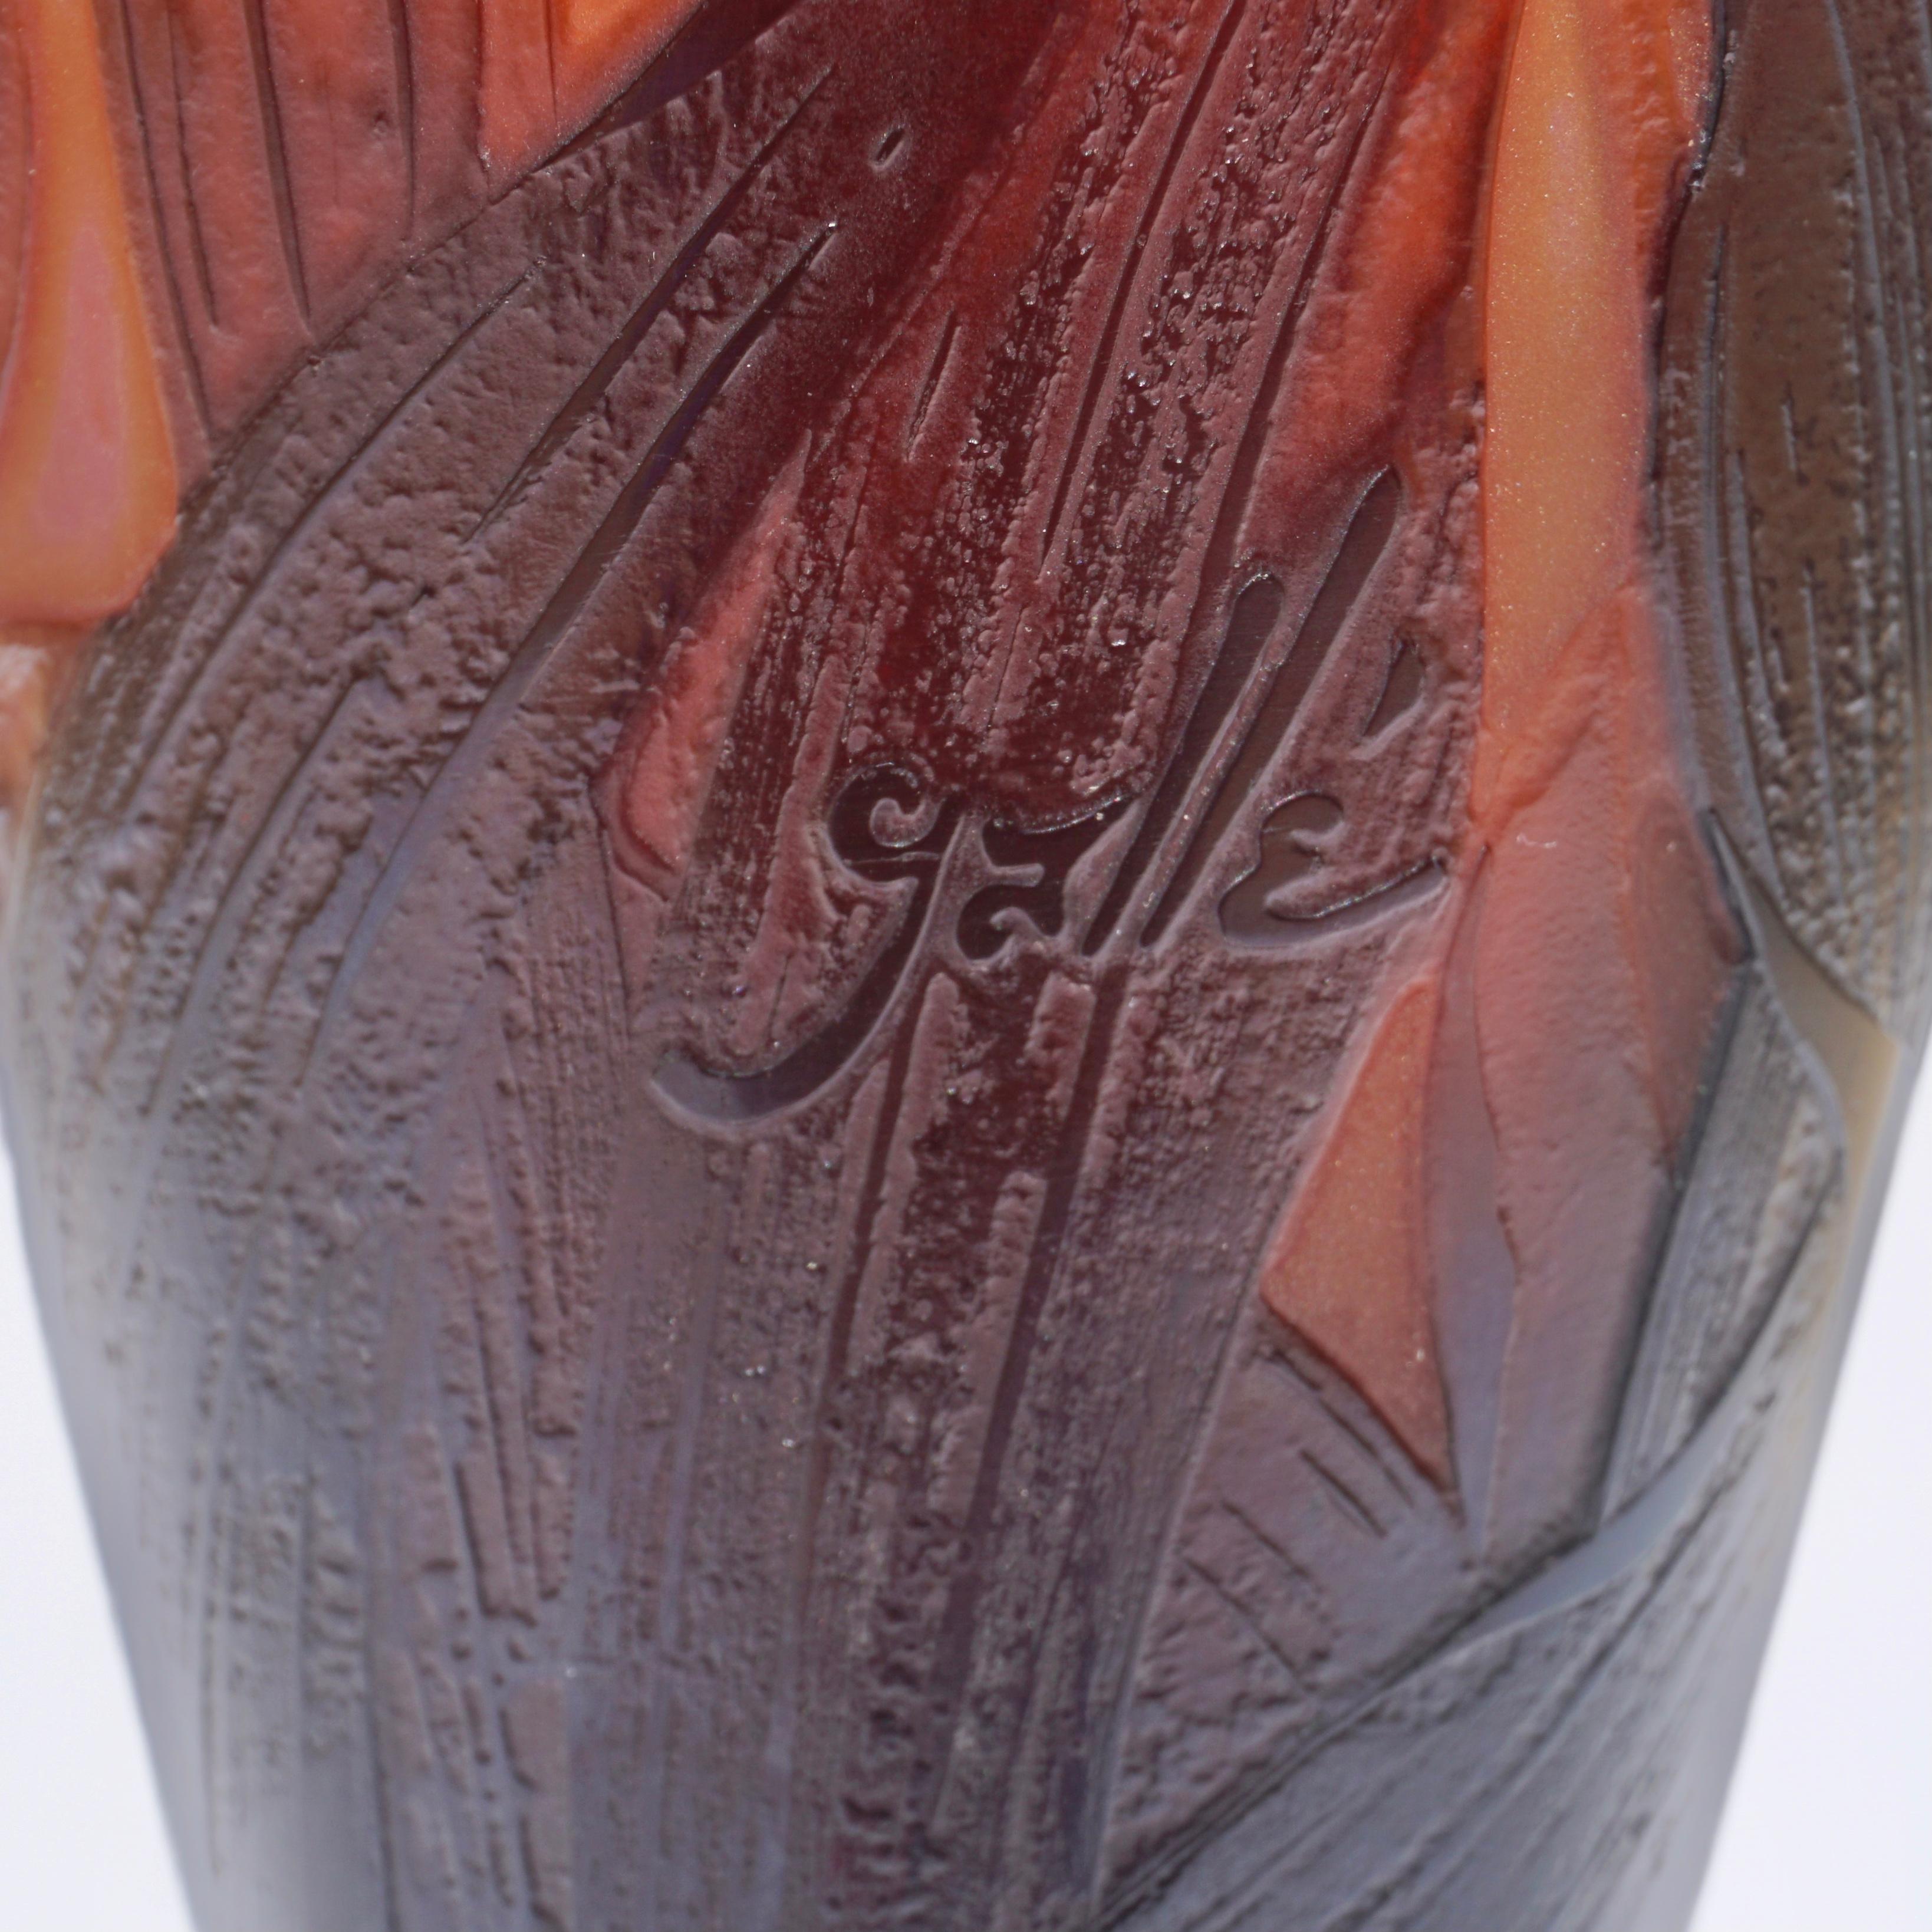 Tall Emile Galle Lily Pedestaled Vase In Excellent Condition For Sale In Dallas, TX